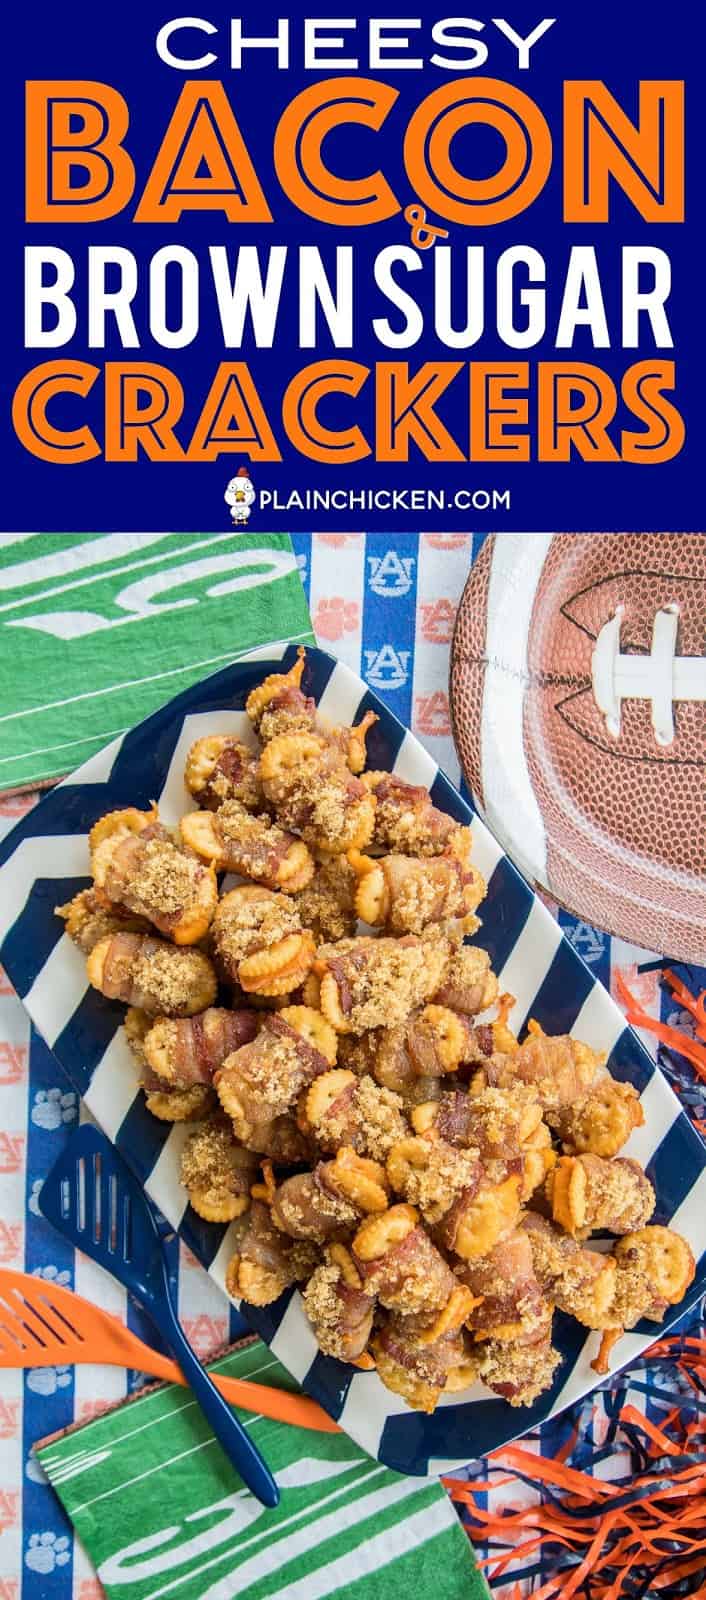 Cheesy Bacon and Brown Sugar Crackers - so good! You can't eat just one!!! Townhouse crackers stuffed with cheddar cheese, wrapped in bacon and topped with brown sugar. These are always a hit at parties!!! Sweet and Savory in every bite! #bacon #appetizers #tailgating